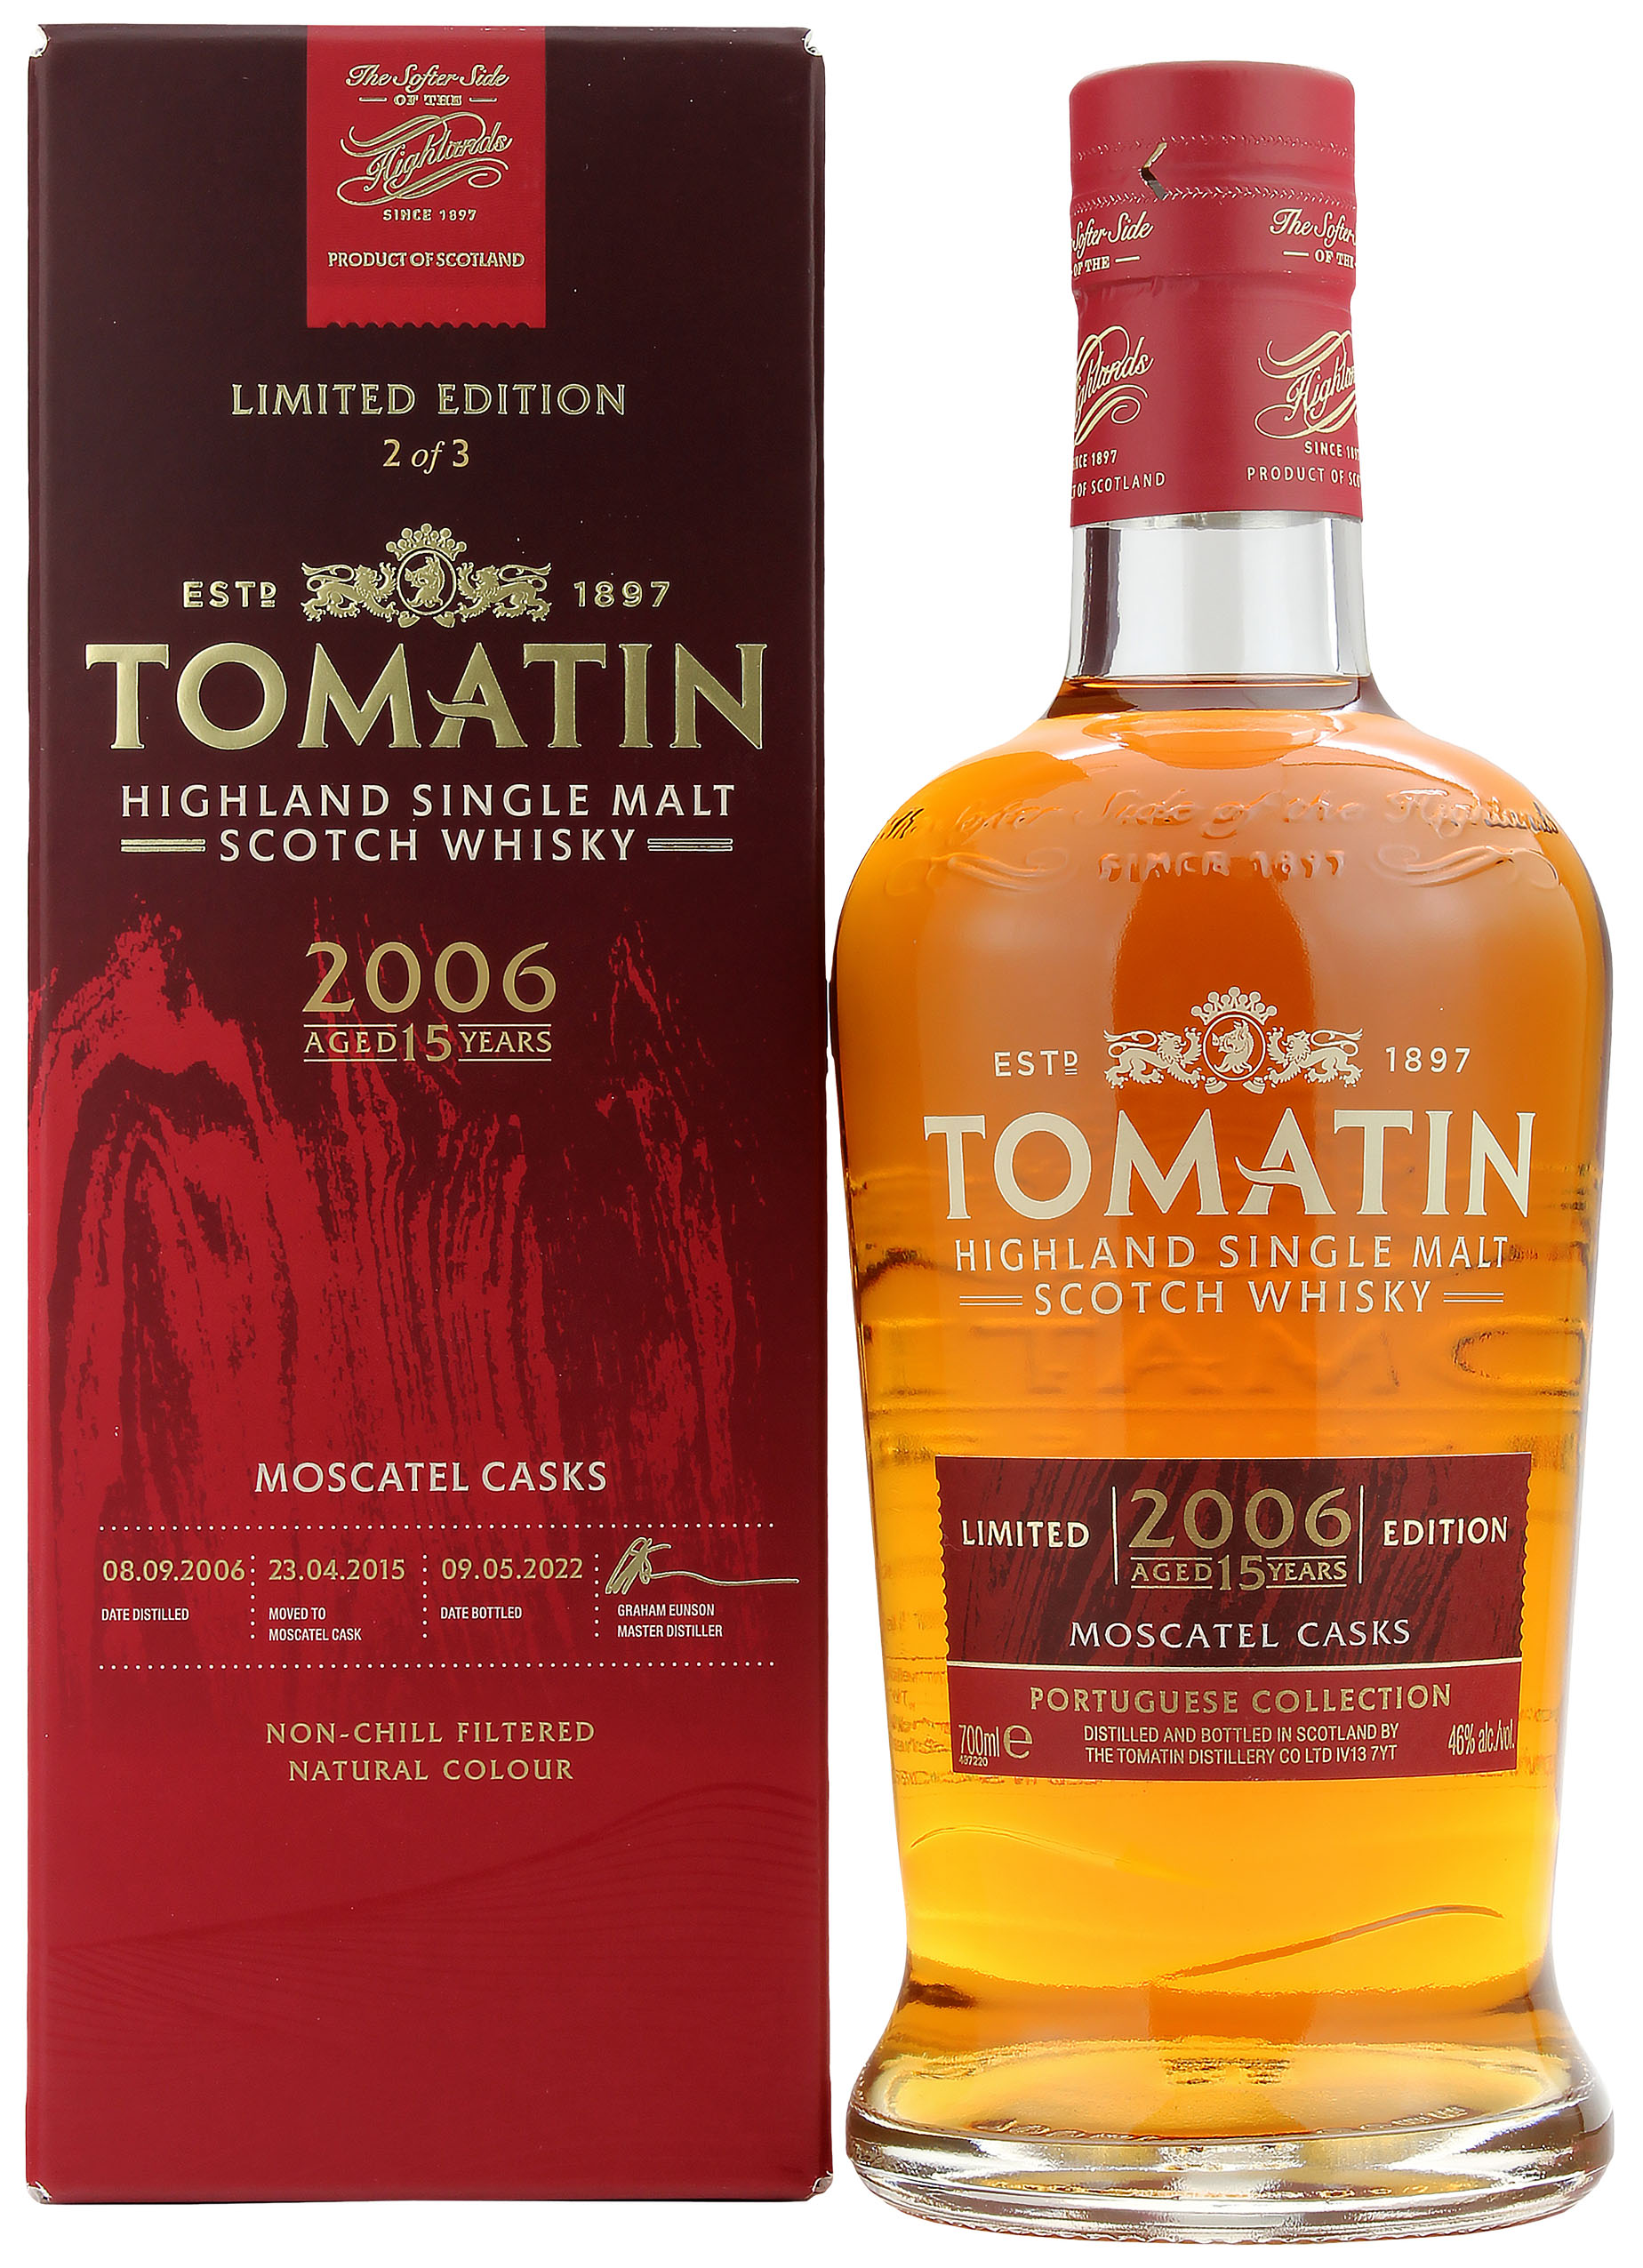 Tomatin 15 Jahre 2006/2022 Moscatel Cask Portuguese Collection 46.0% 0,7l